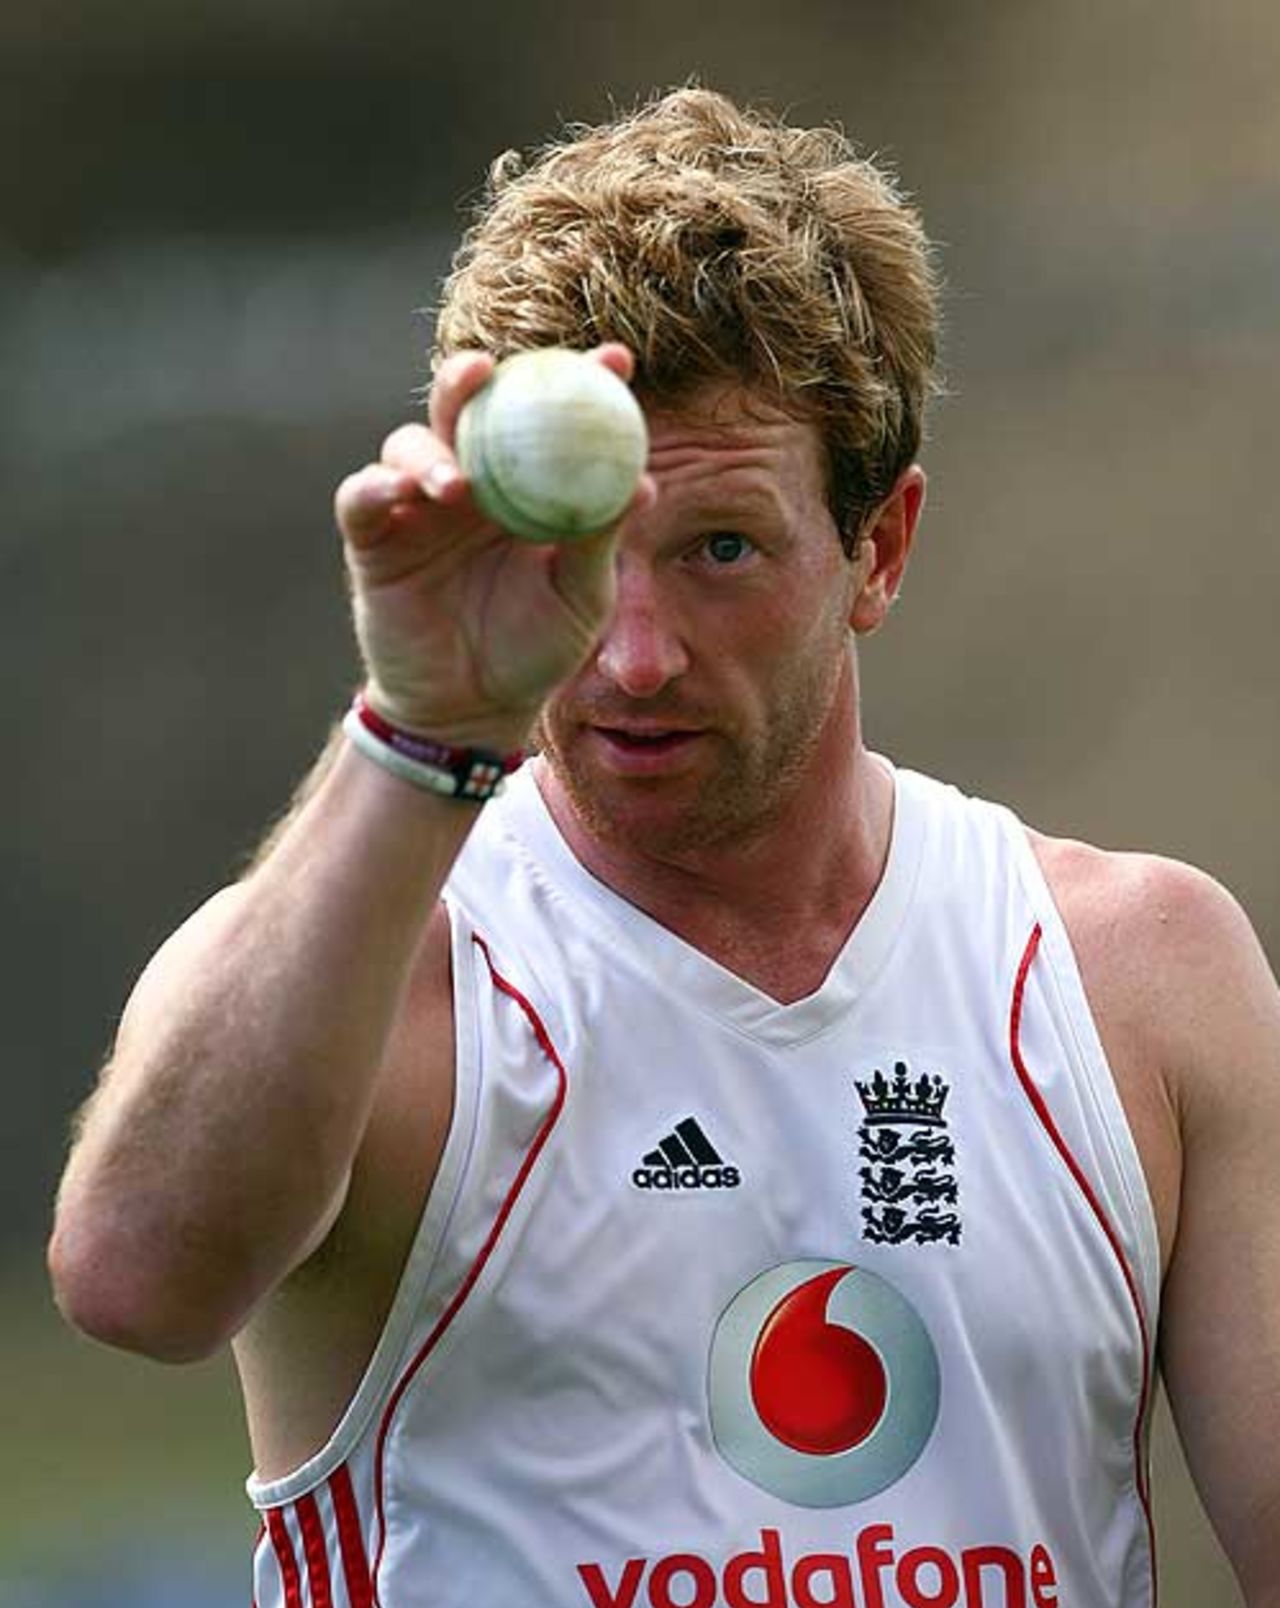 Paul Collingwood knows exactly what he wants to do at the nets, St Lucia, April 2, 2009